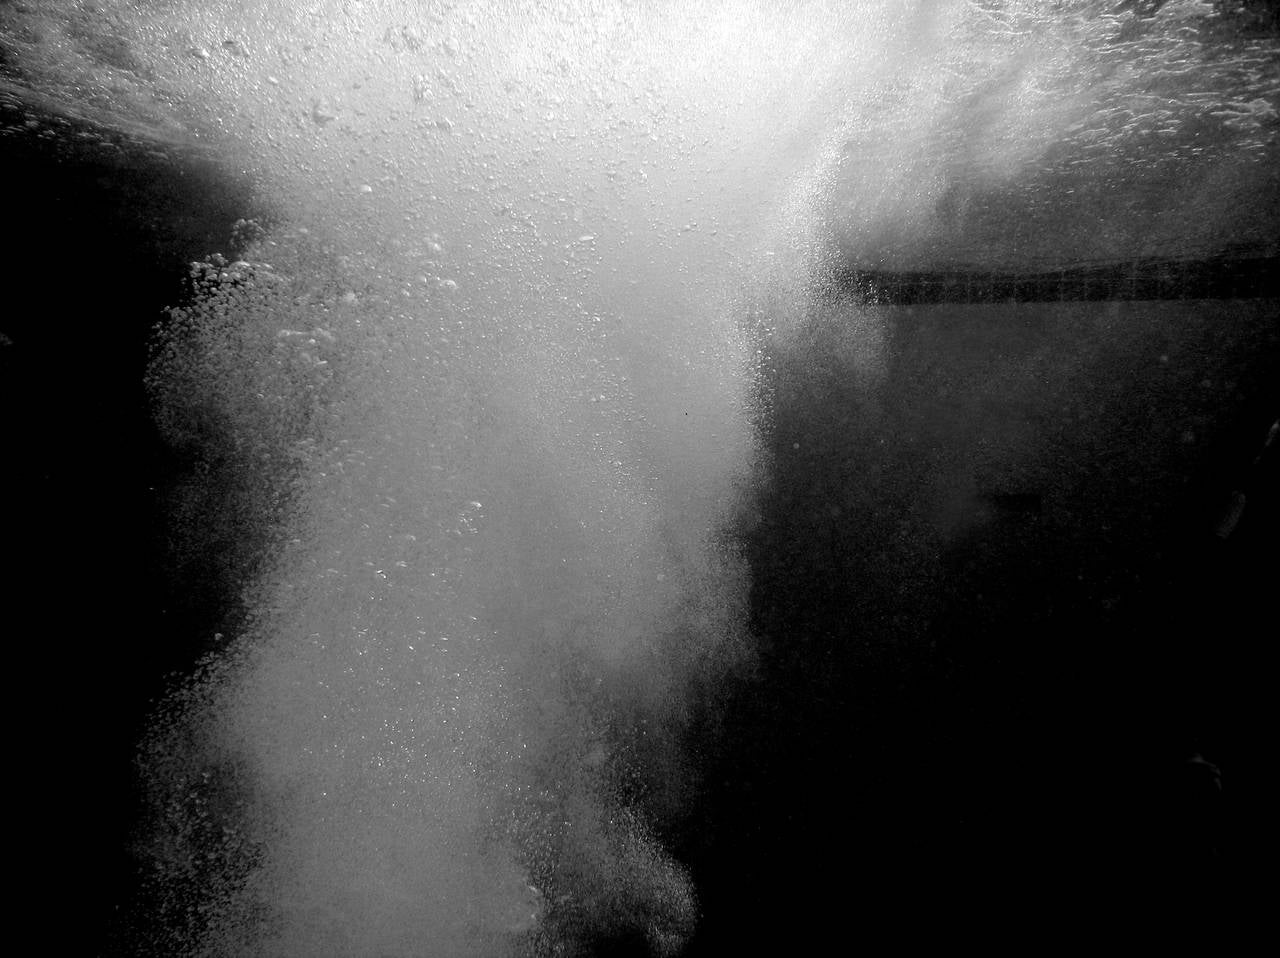 Eric Zener Black and White Photograph - WATER STUDY 1,  huge splash in water, bubbles, black and white, dark water